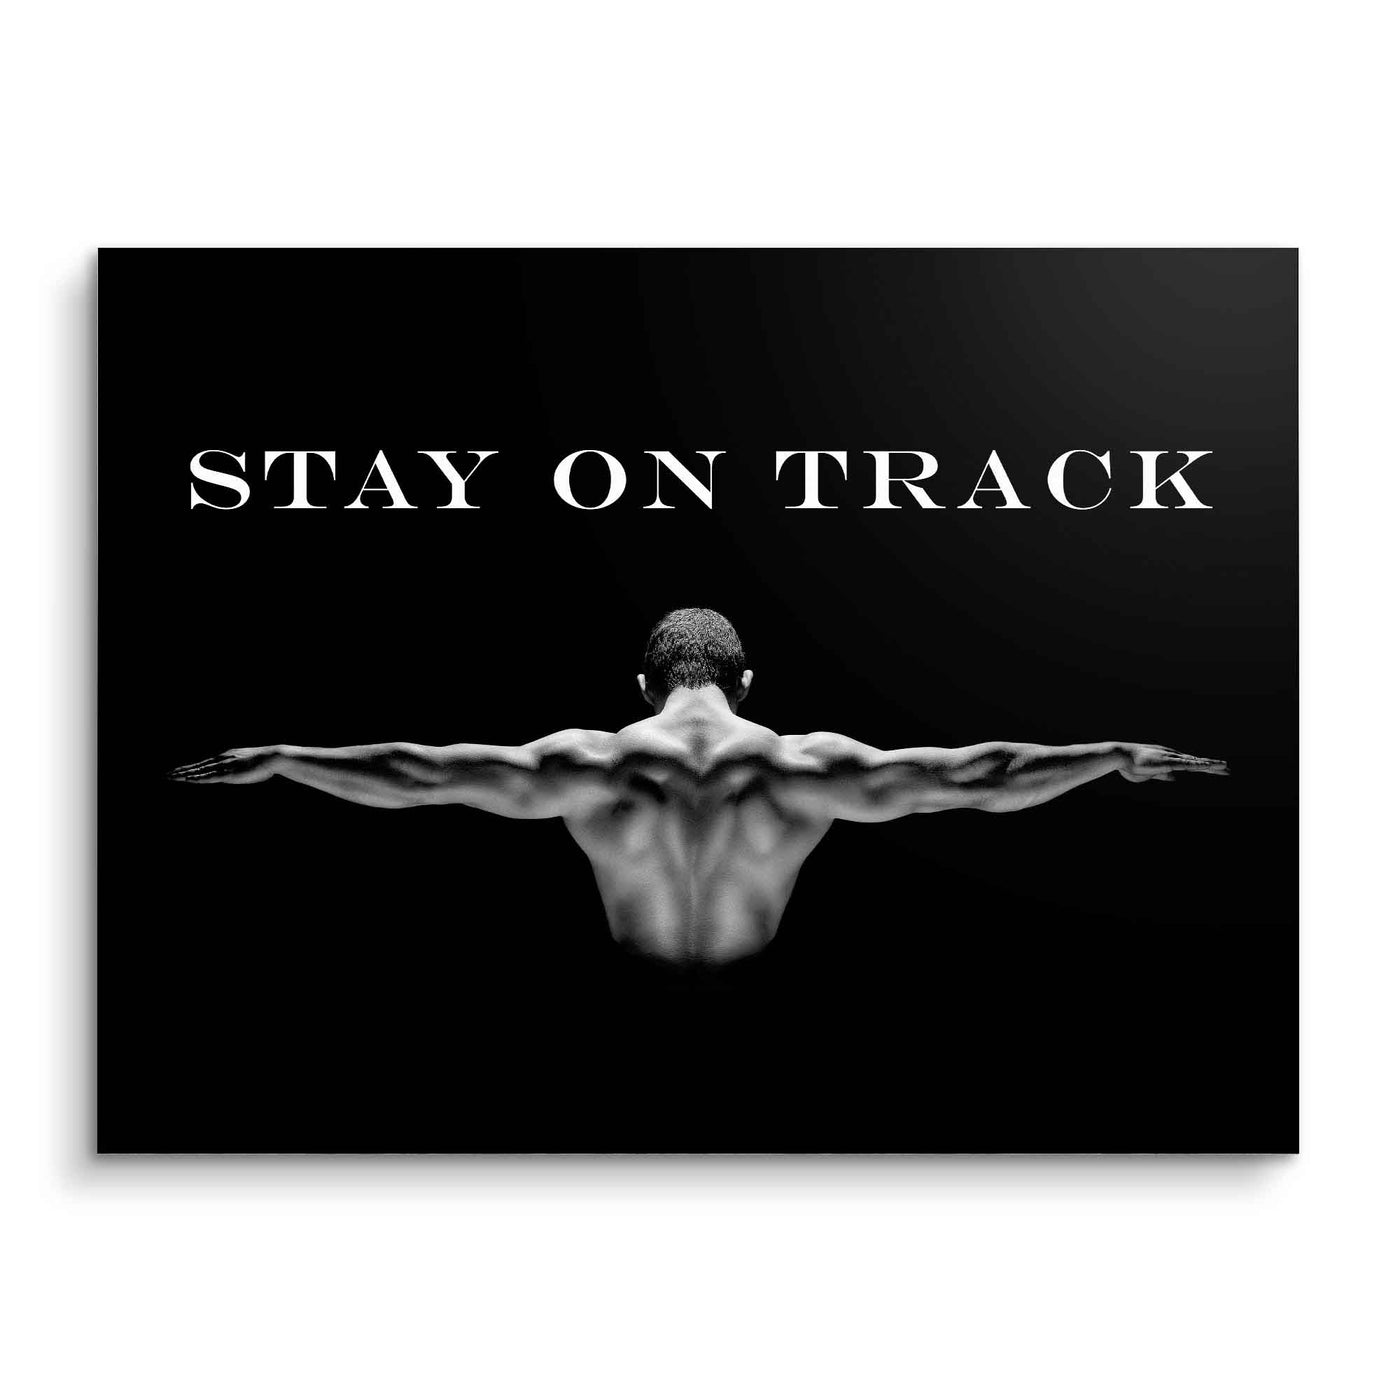 Stay on track